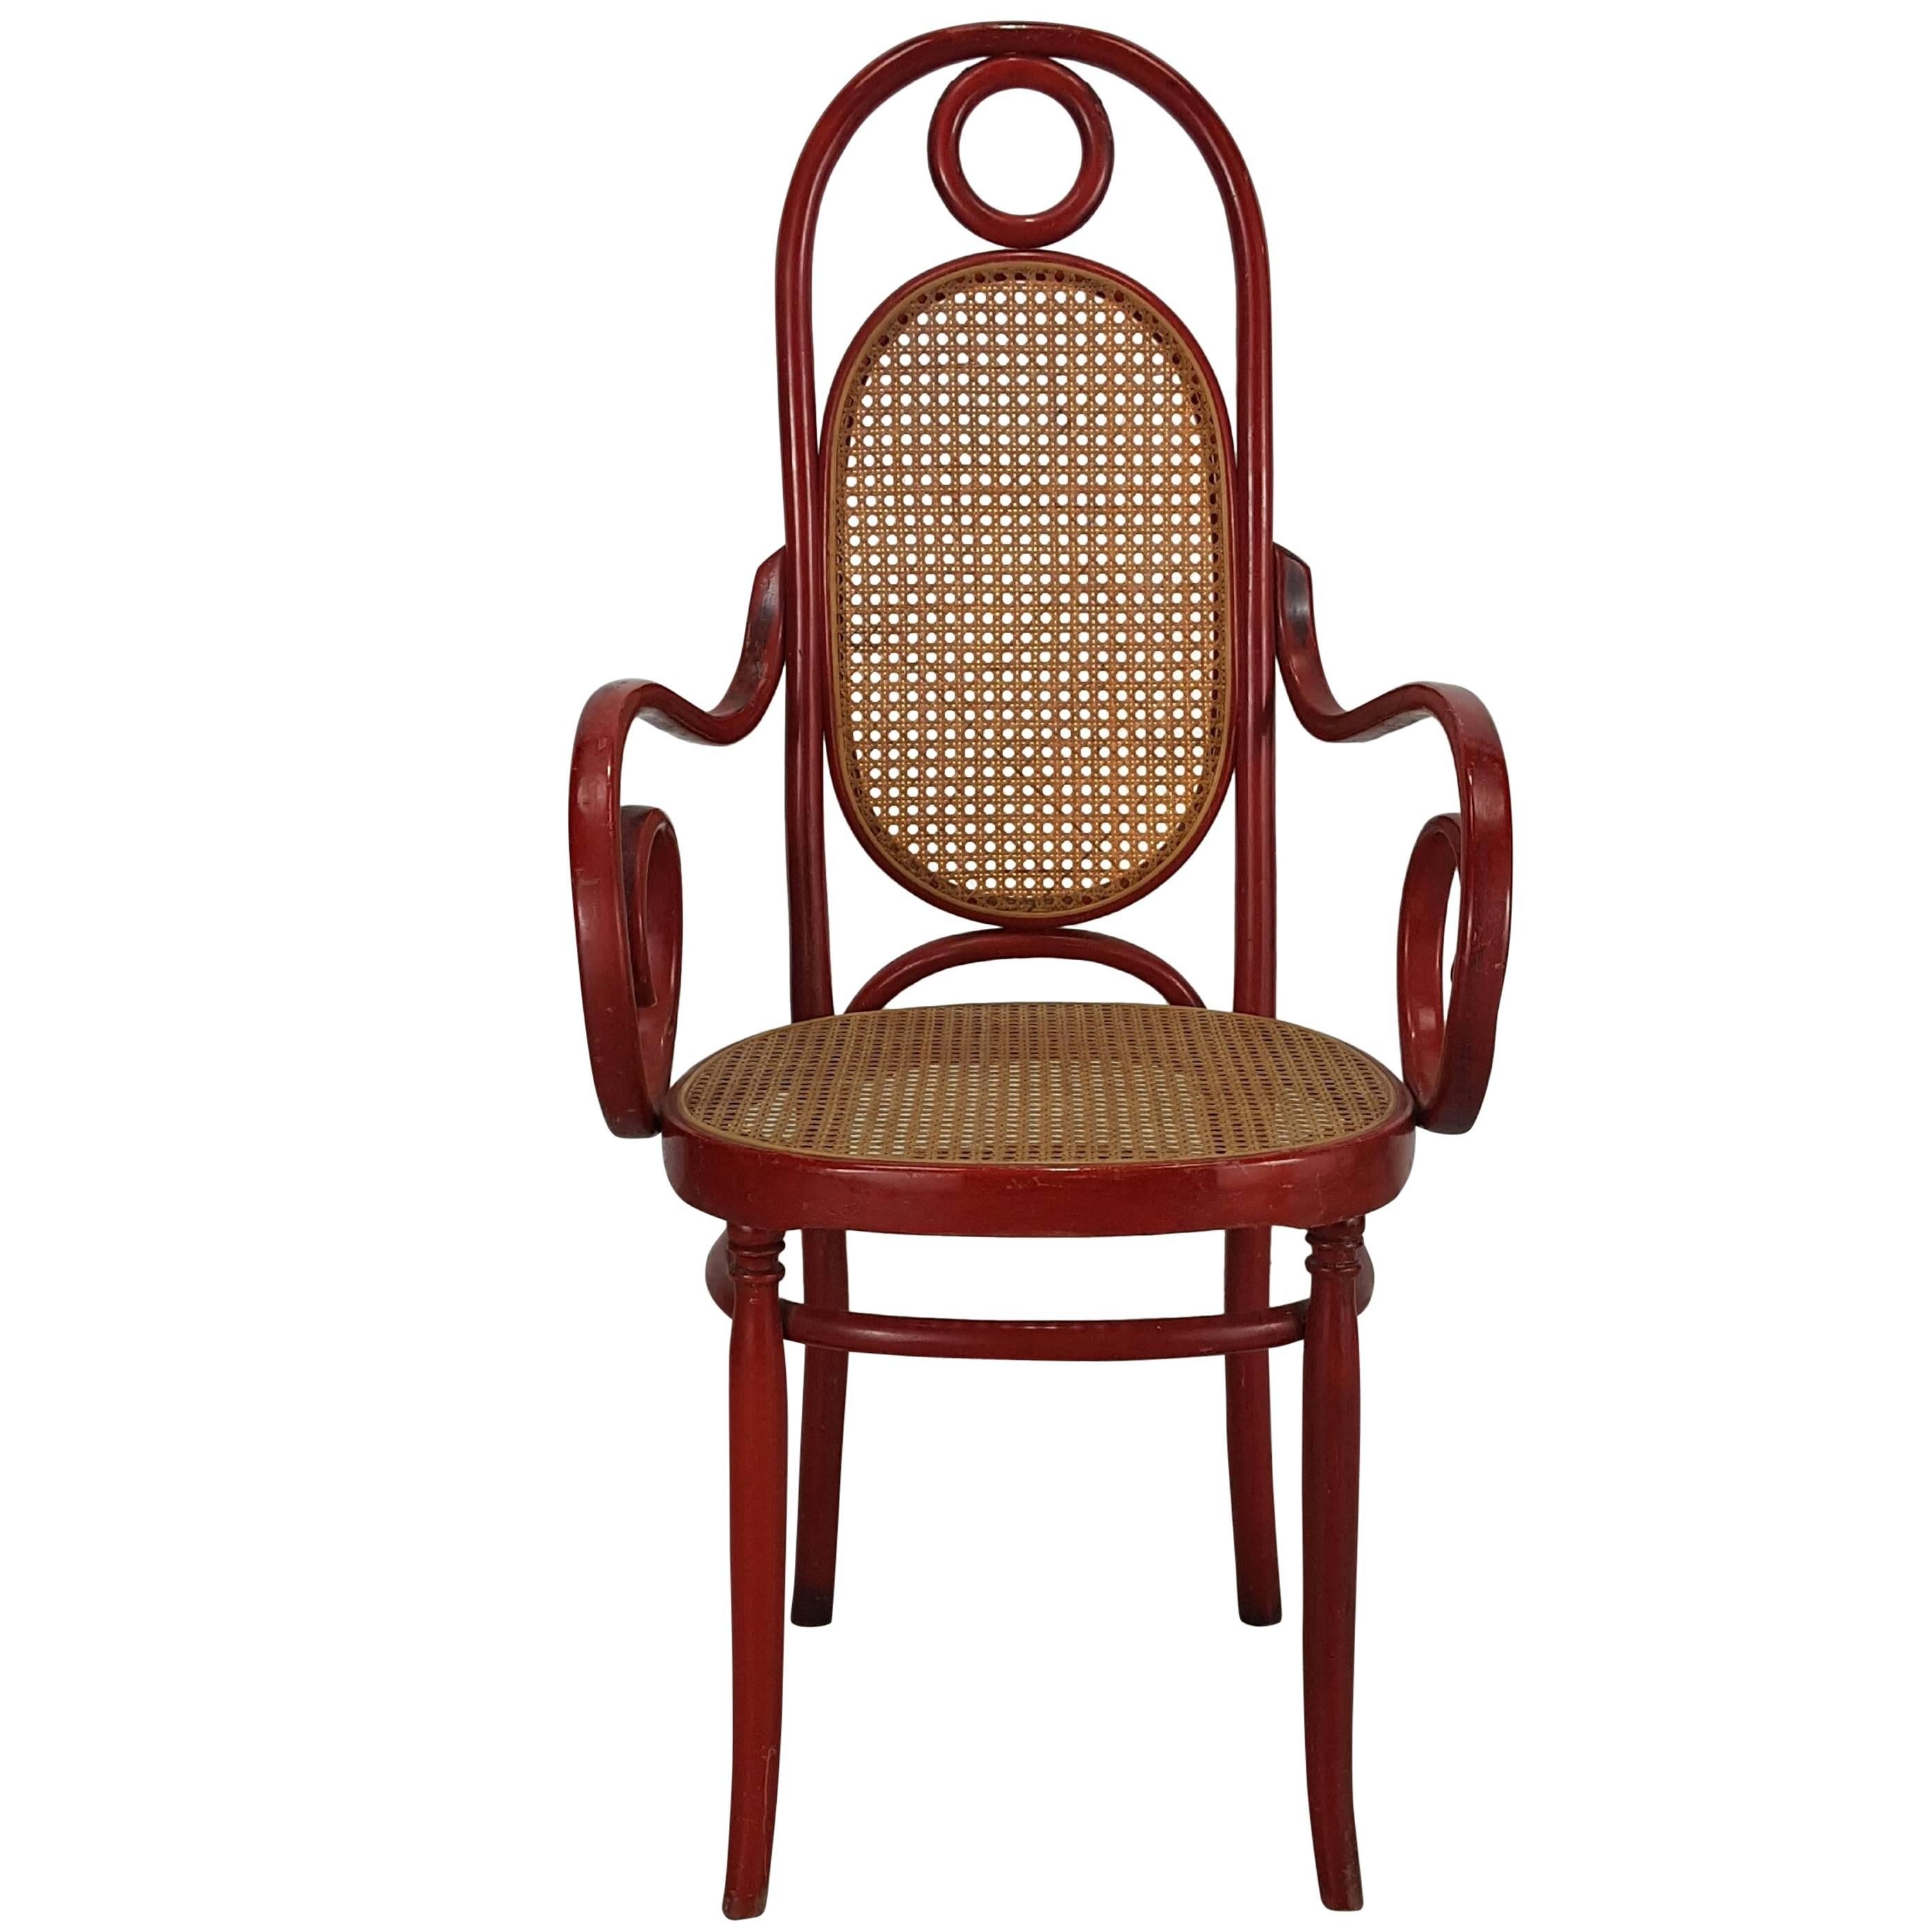  Model 17 Bentwood High Back Armchair by Michael Thonet